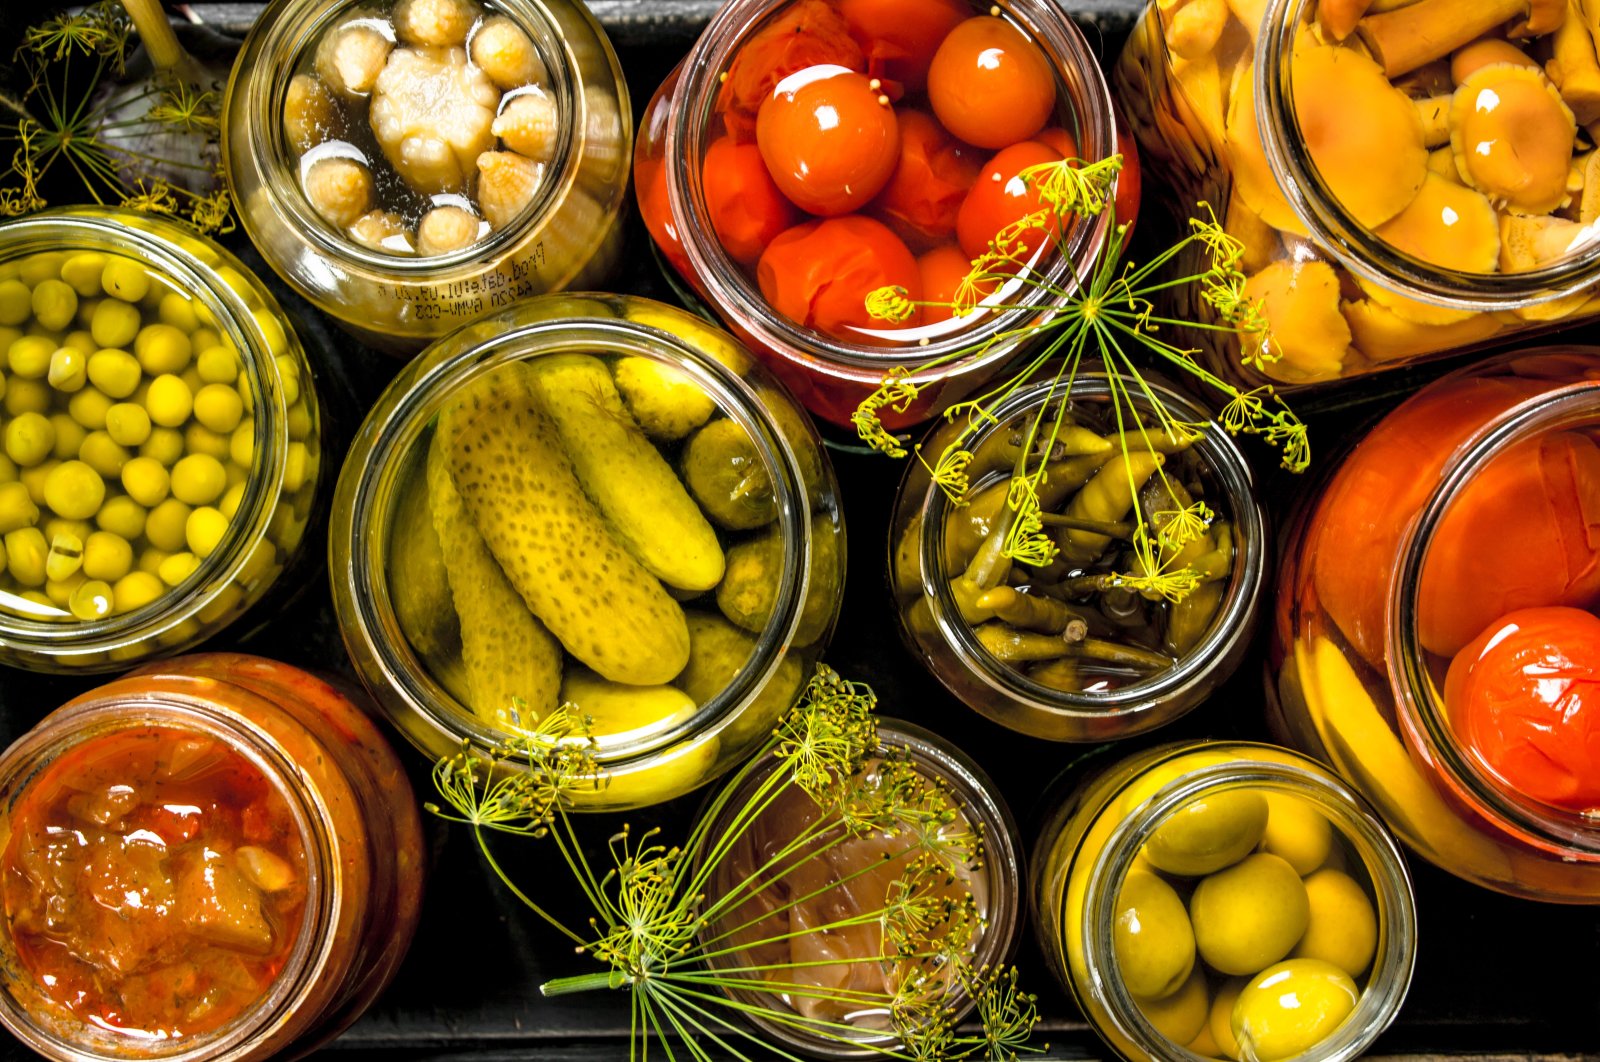 Pickles can be prepared from any vegetable. (Shutterstock)